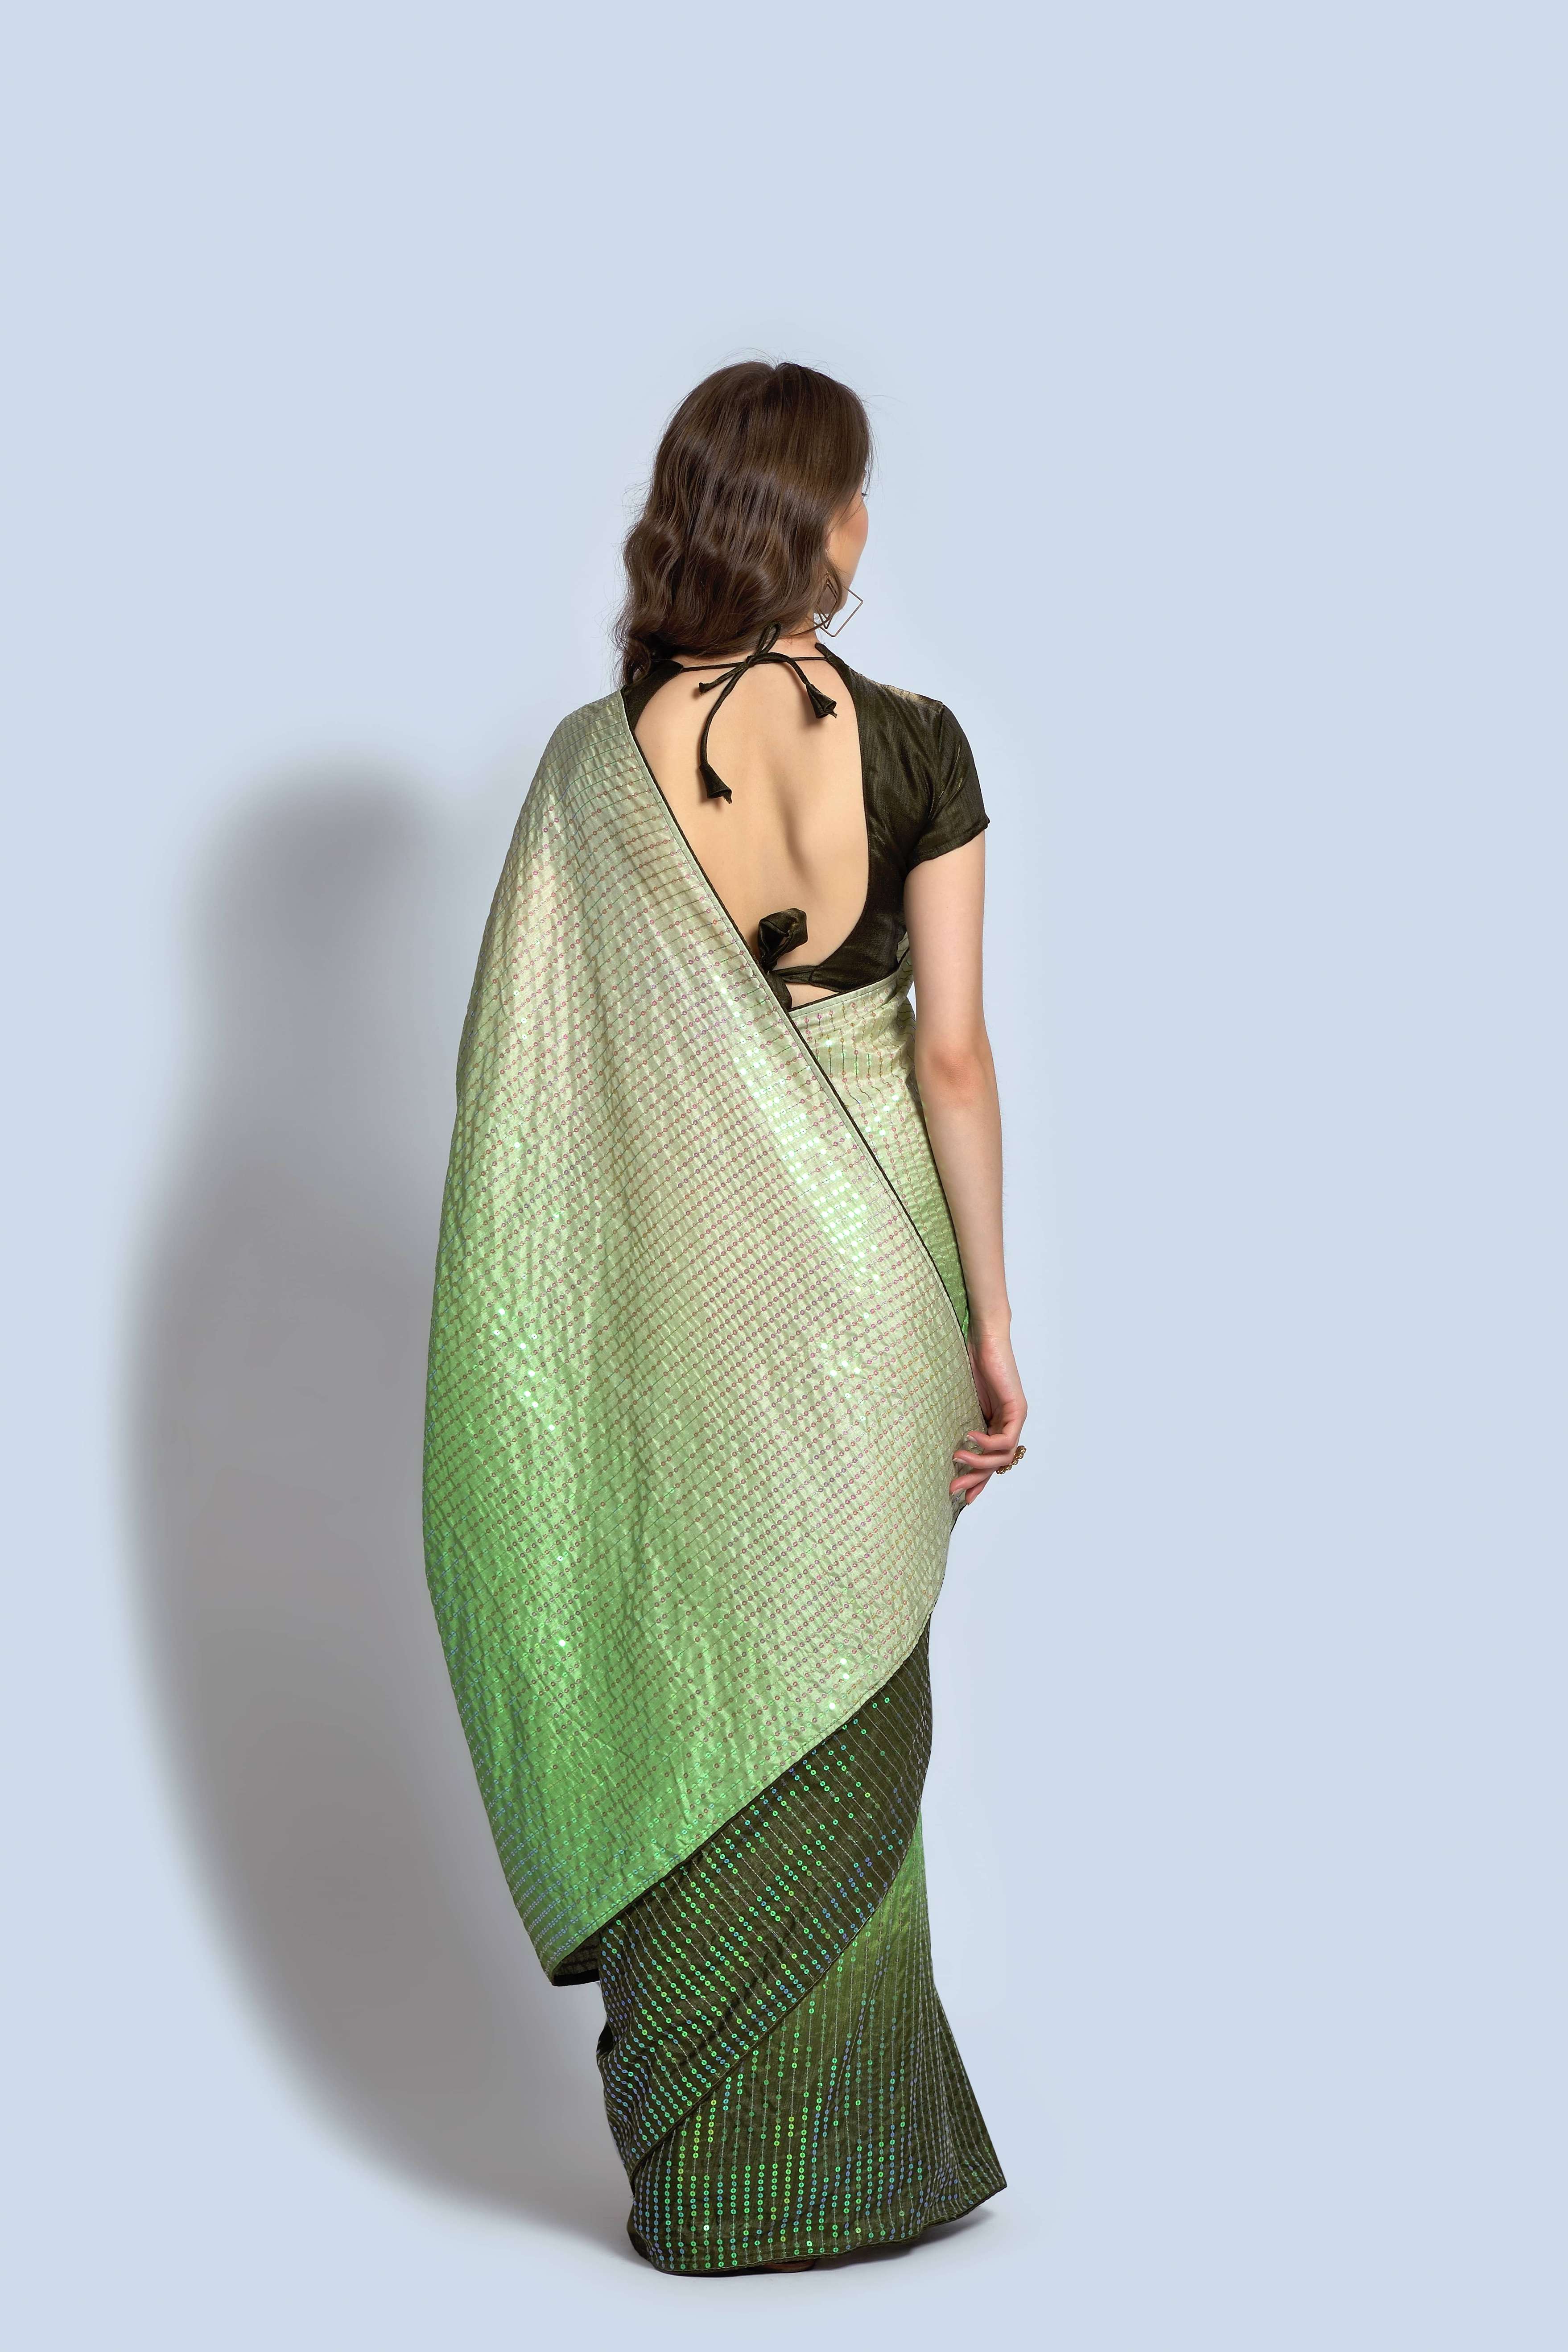 Beautiful Sequance Embroidery Green Saree For Women